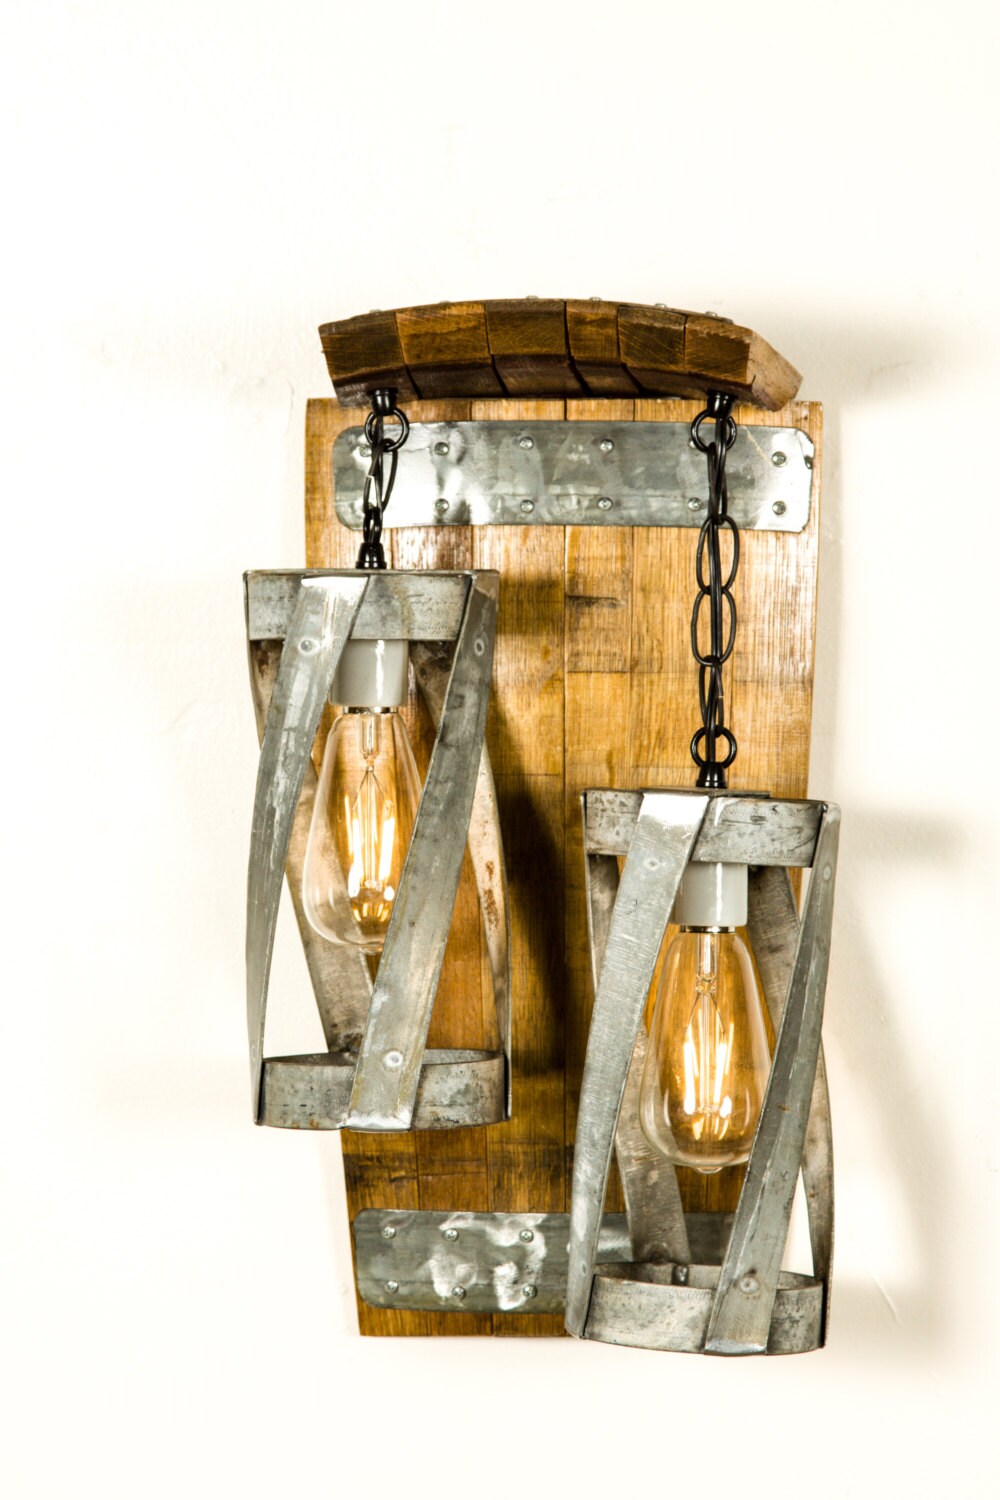 Wine Barrel Wall Sconce - Double Vitali - Made from retired California wine barrel and staves. 100% Recycled!